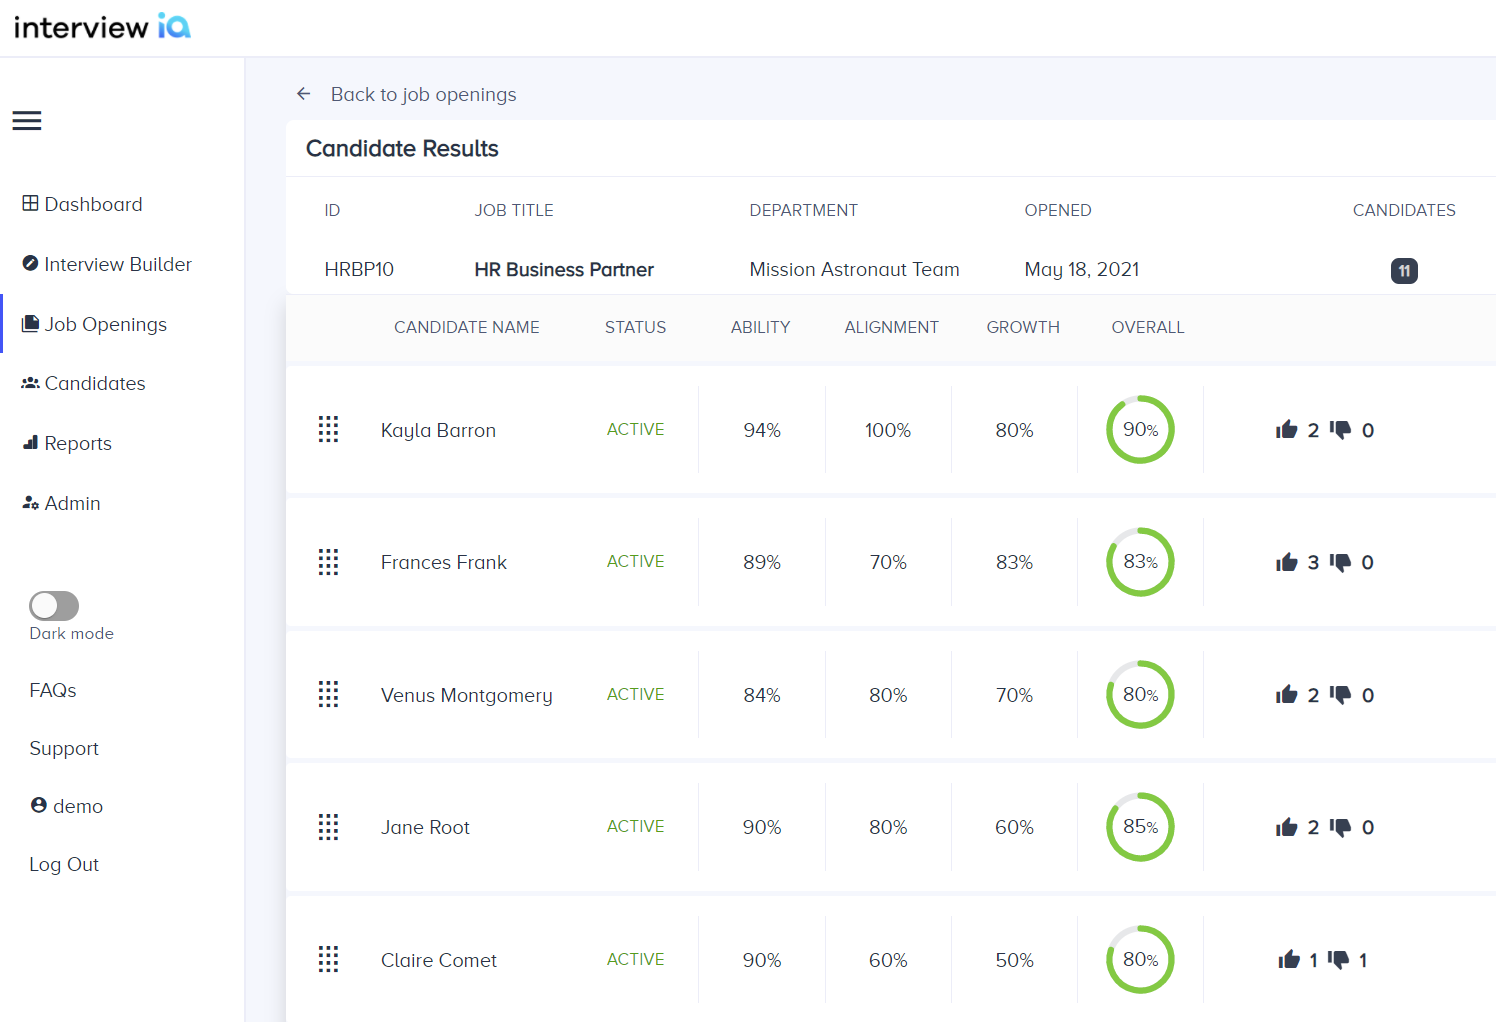 Candidate Stacking and Ranking - compare candidates side-by-side with data-driven decision support to make the best hiring decision for your open role.